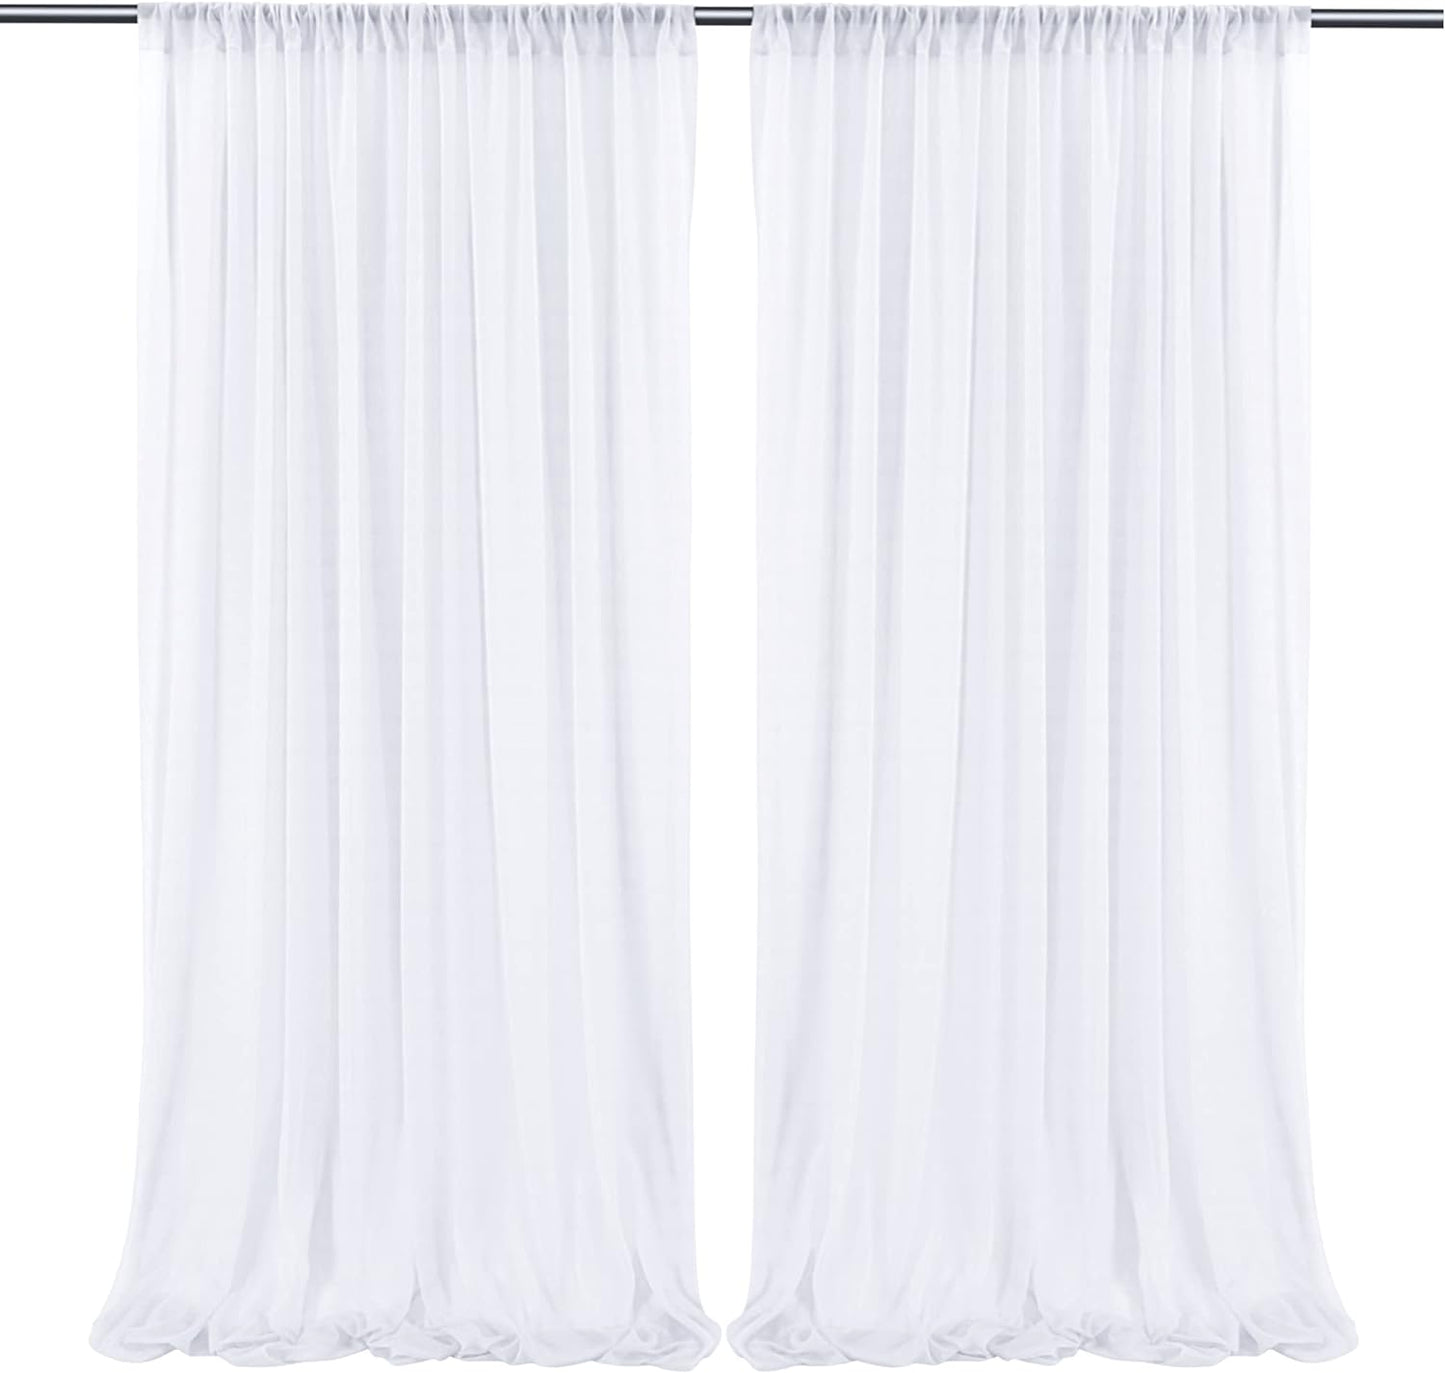 10Ft X 10Ft White Chiffon Backdrop Curtains, Wrinkle-Free Sheer Chiffon Fabric Curtain Drapes for Wedding Ceremony Arch Party Stage Decoration  Wish Care White  